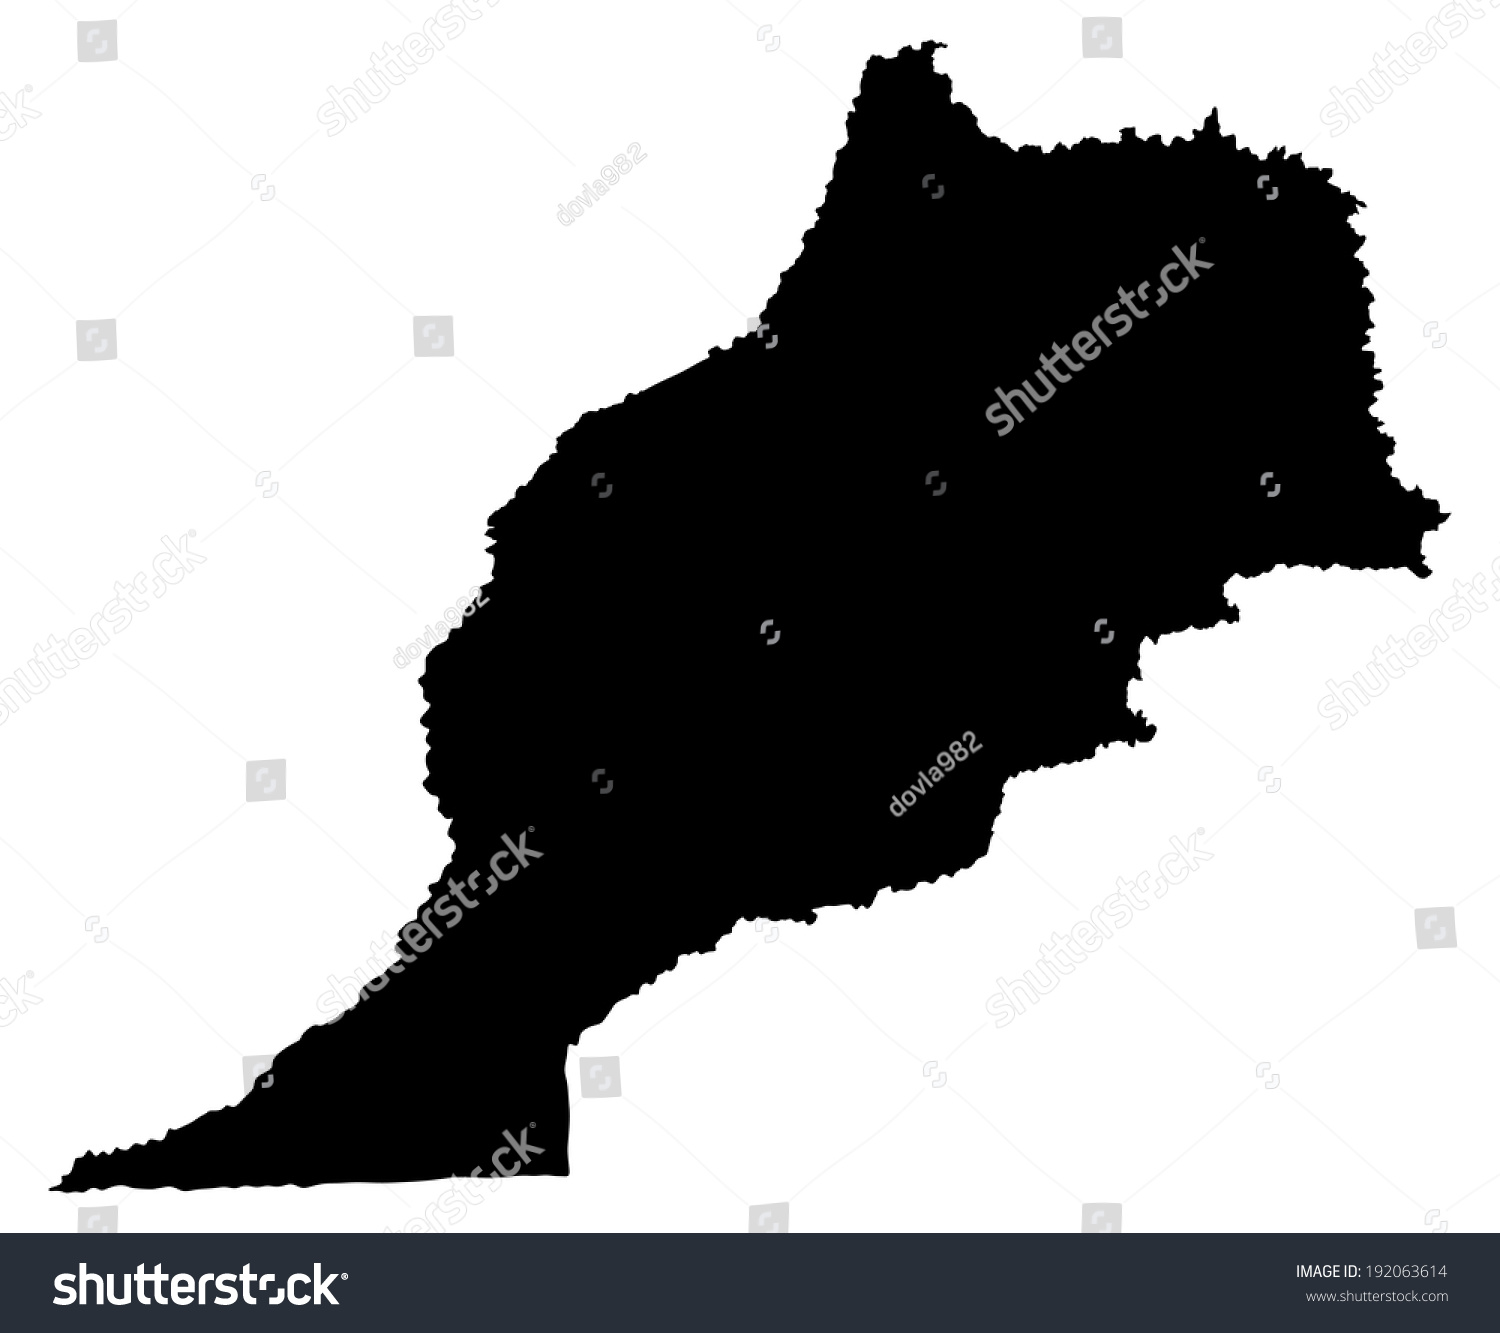 Morocco Vector Map Isolated On White Stock Vector 192063614 - Shutterstock